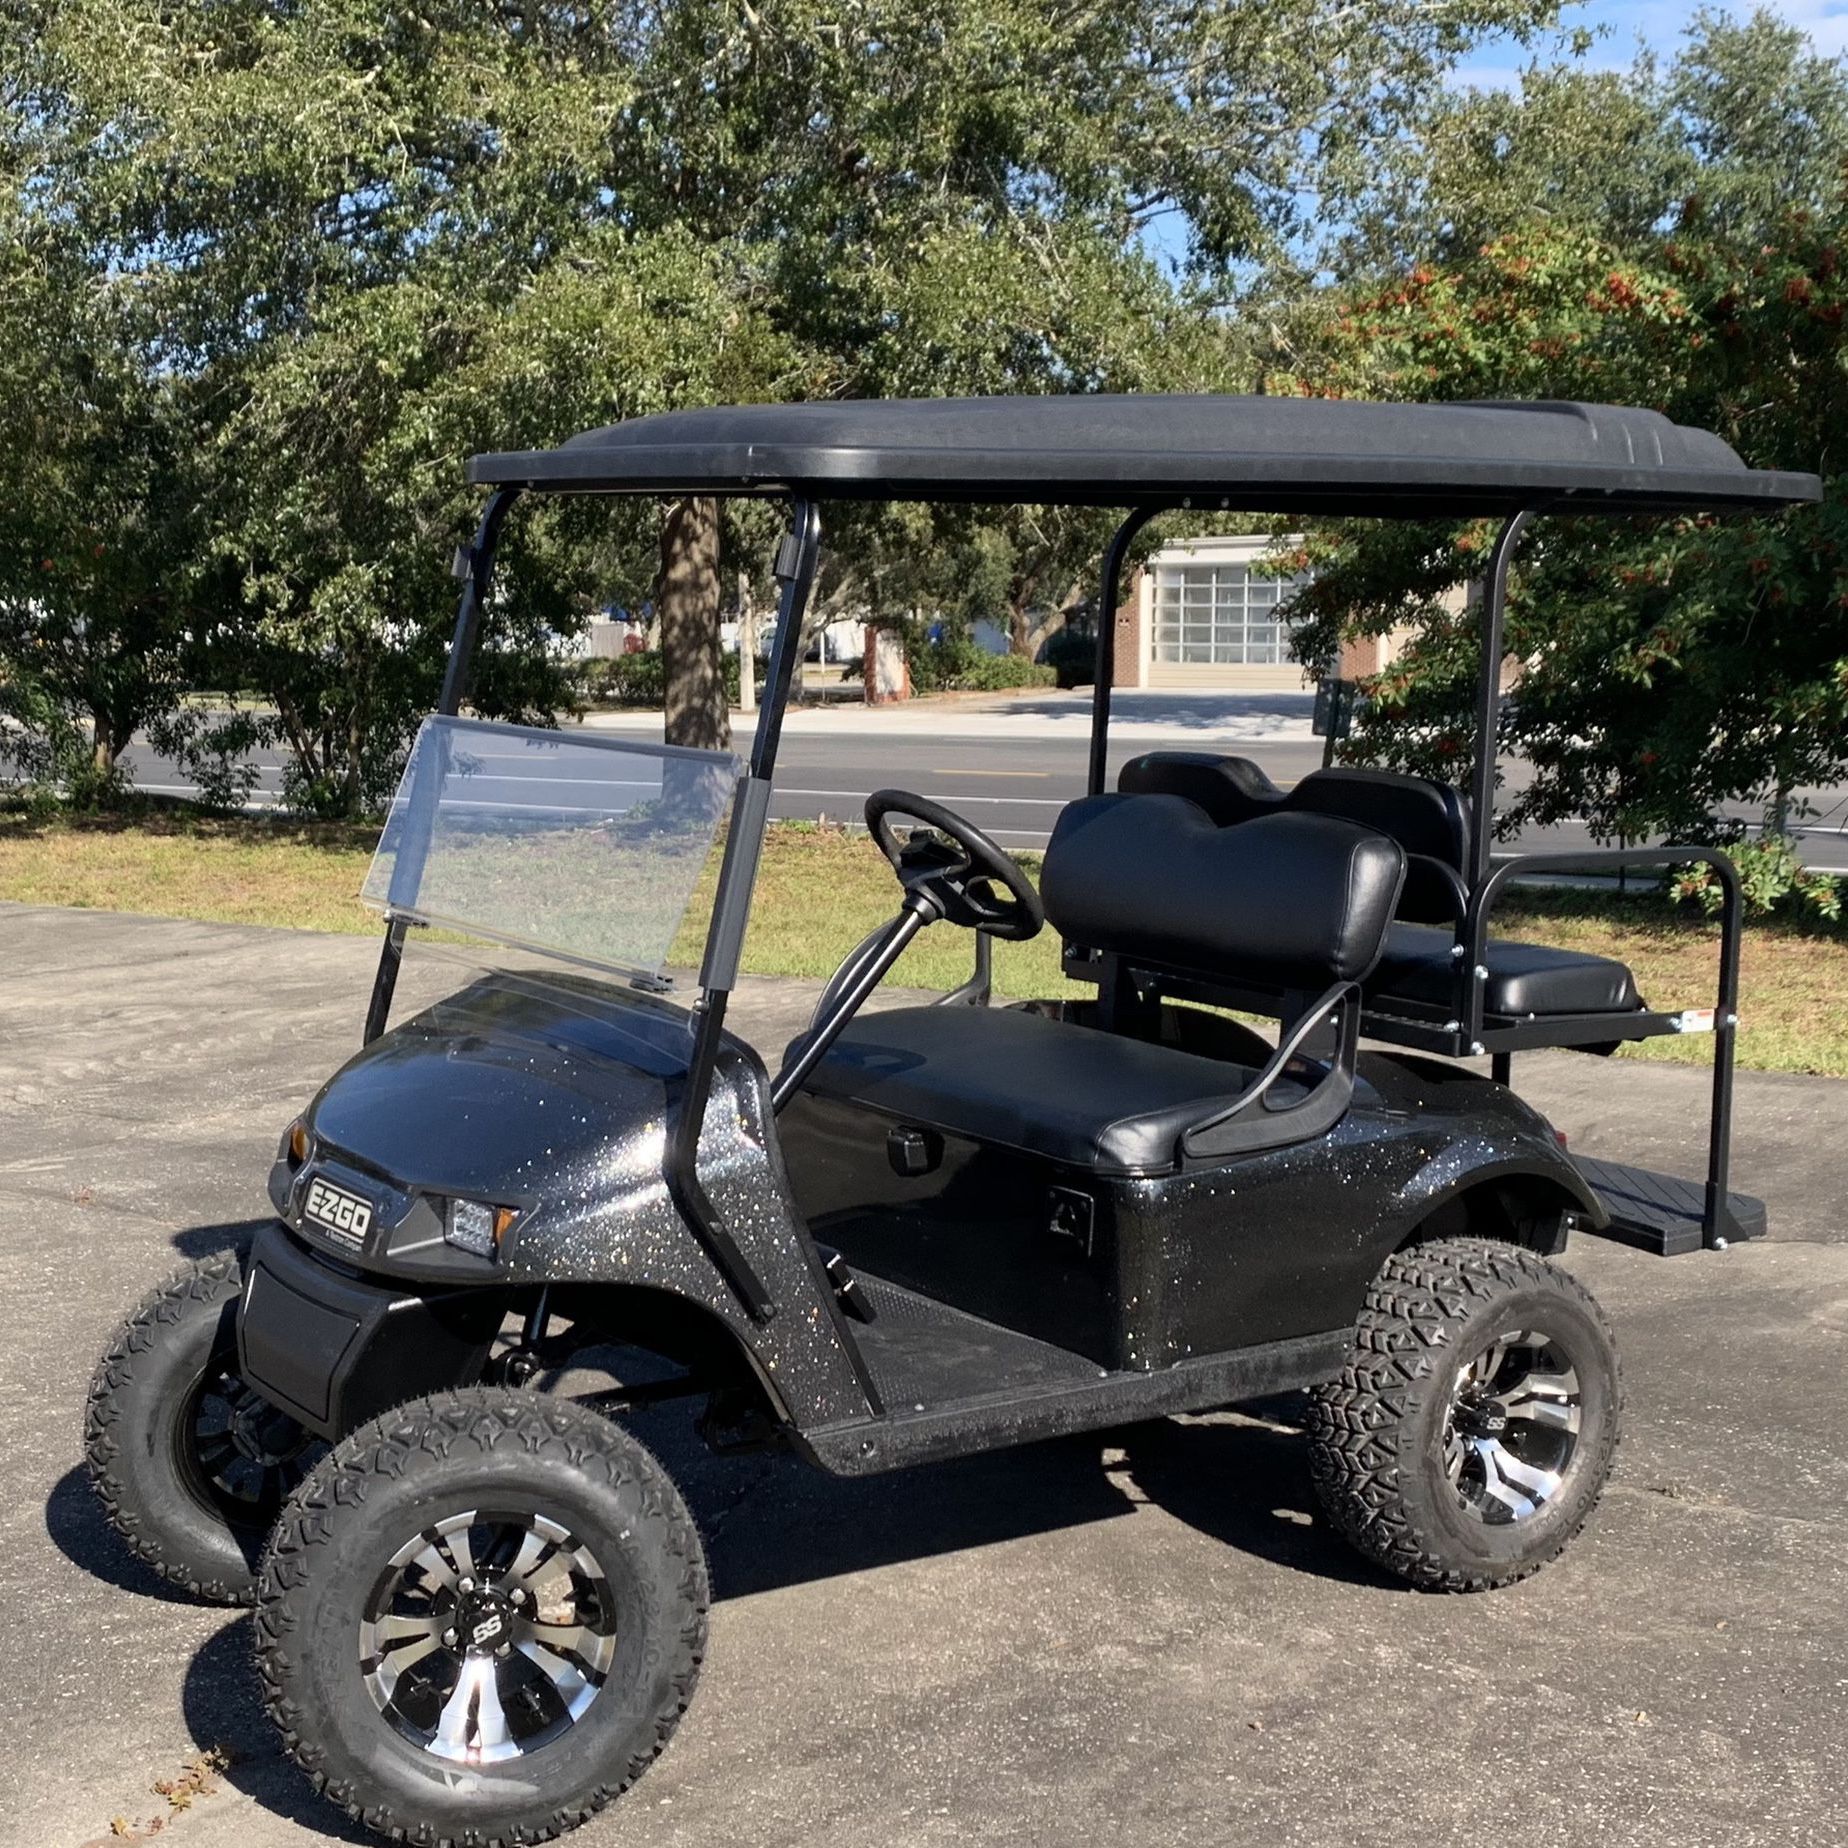 Lifted EZGO Golf cart. New Batteries, Totally Refurbished